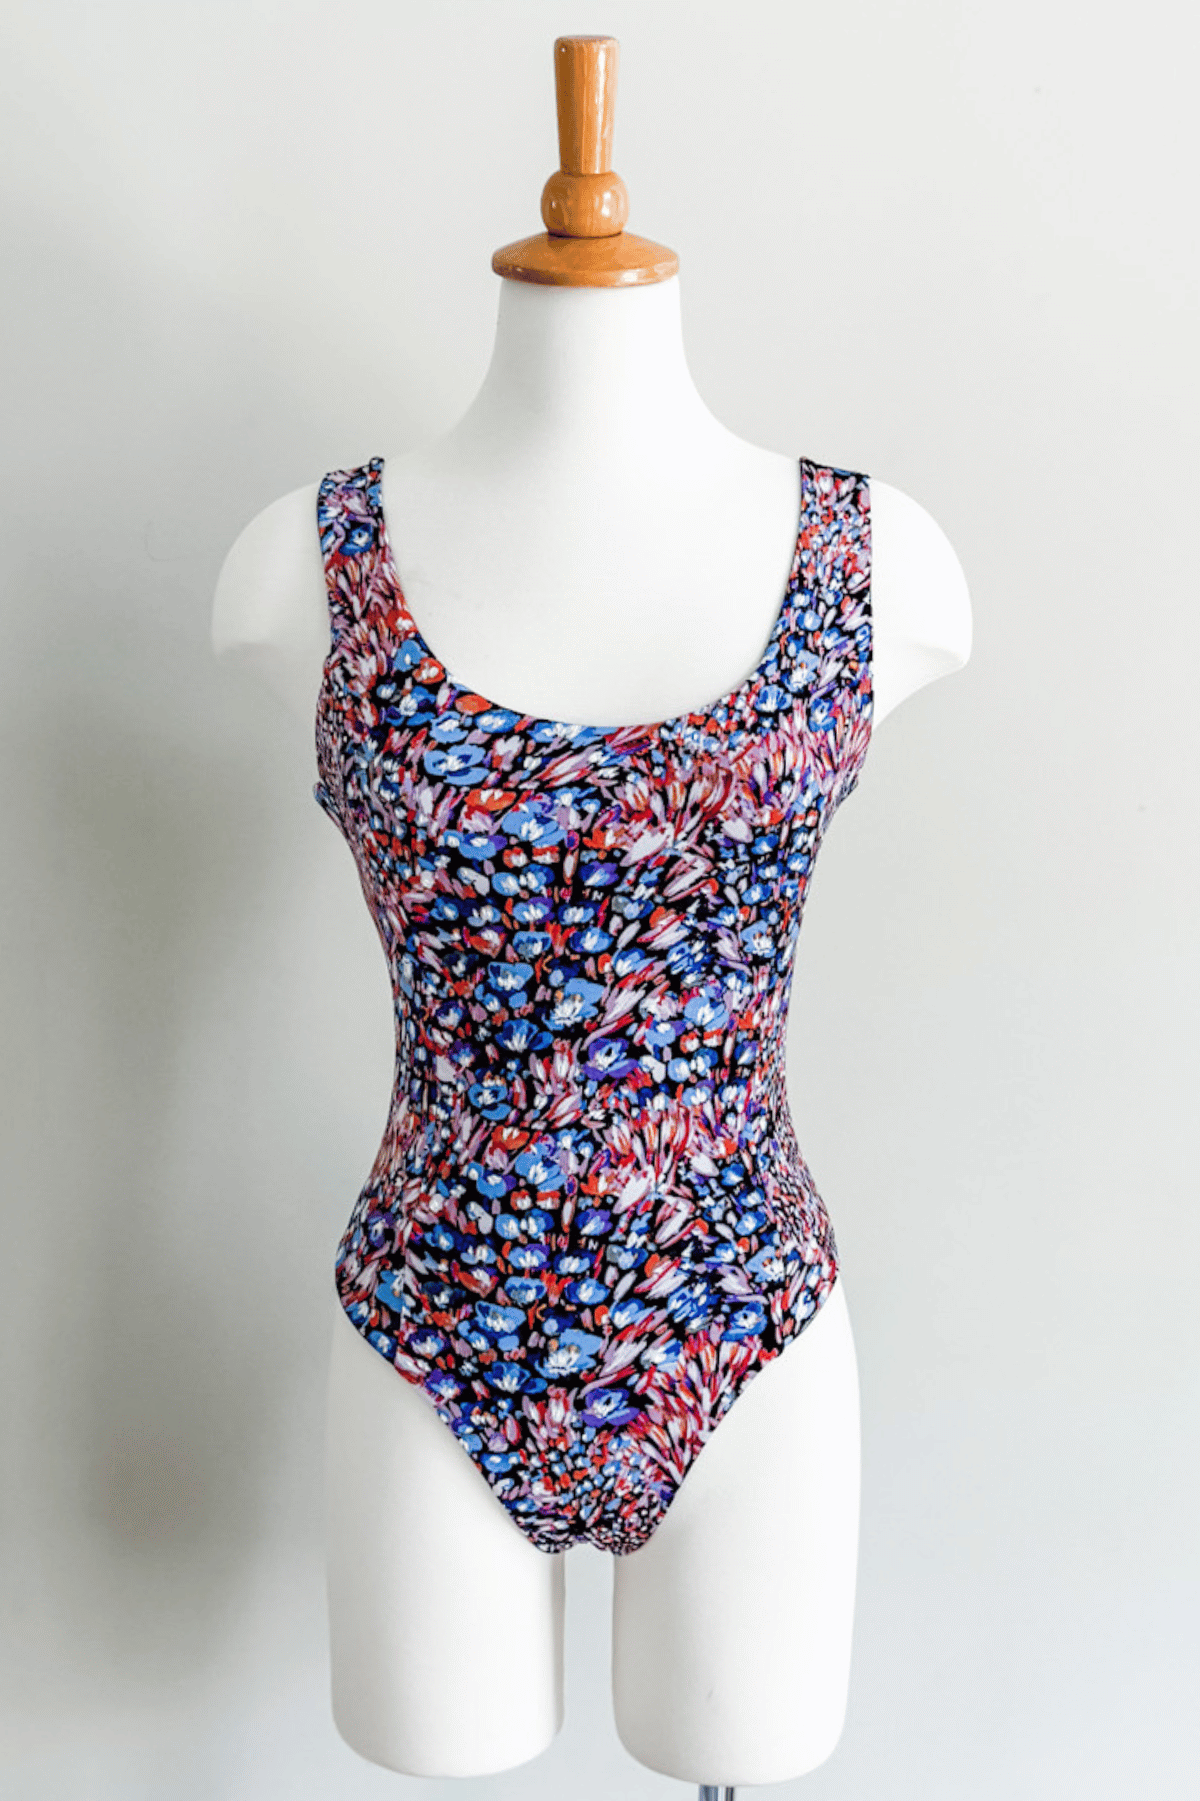 Reversible Body Suit in Whimsical Floral